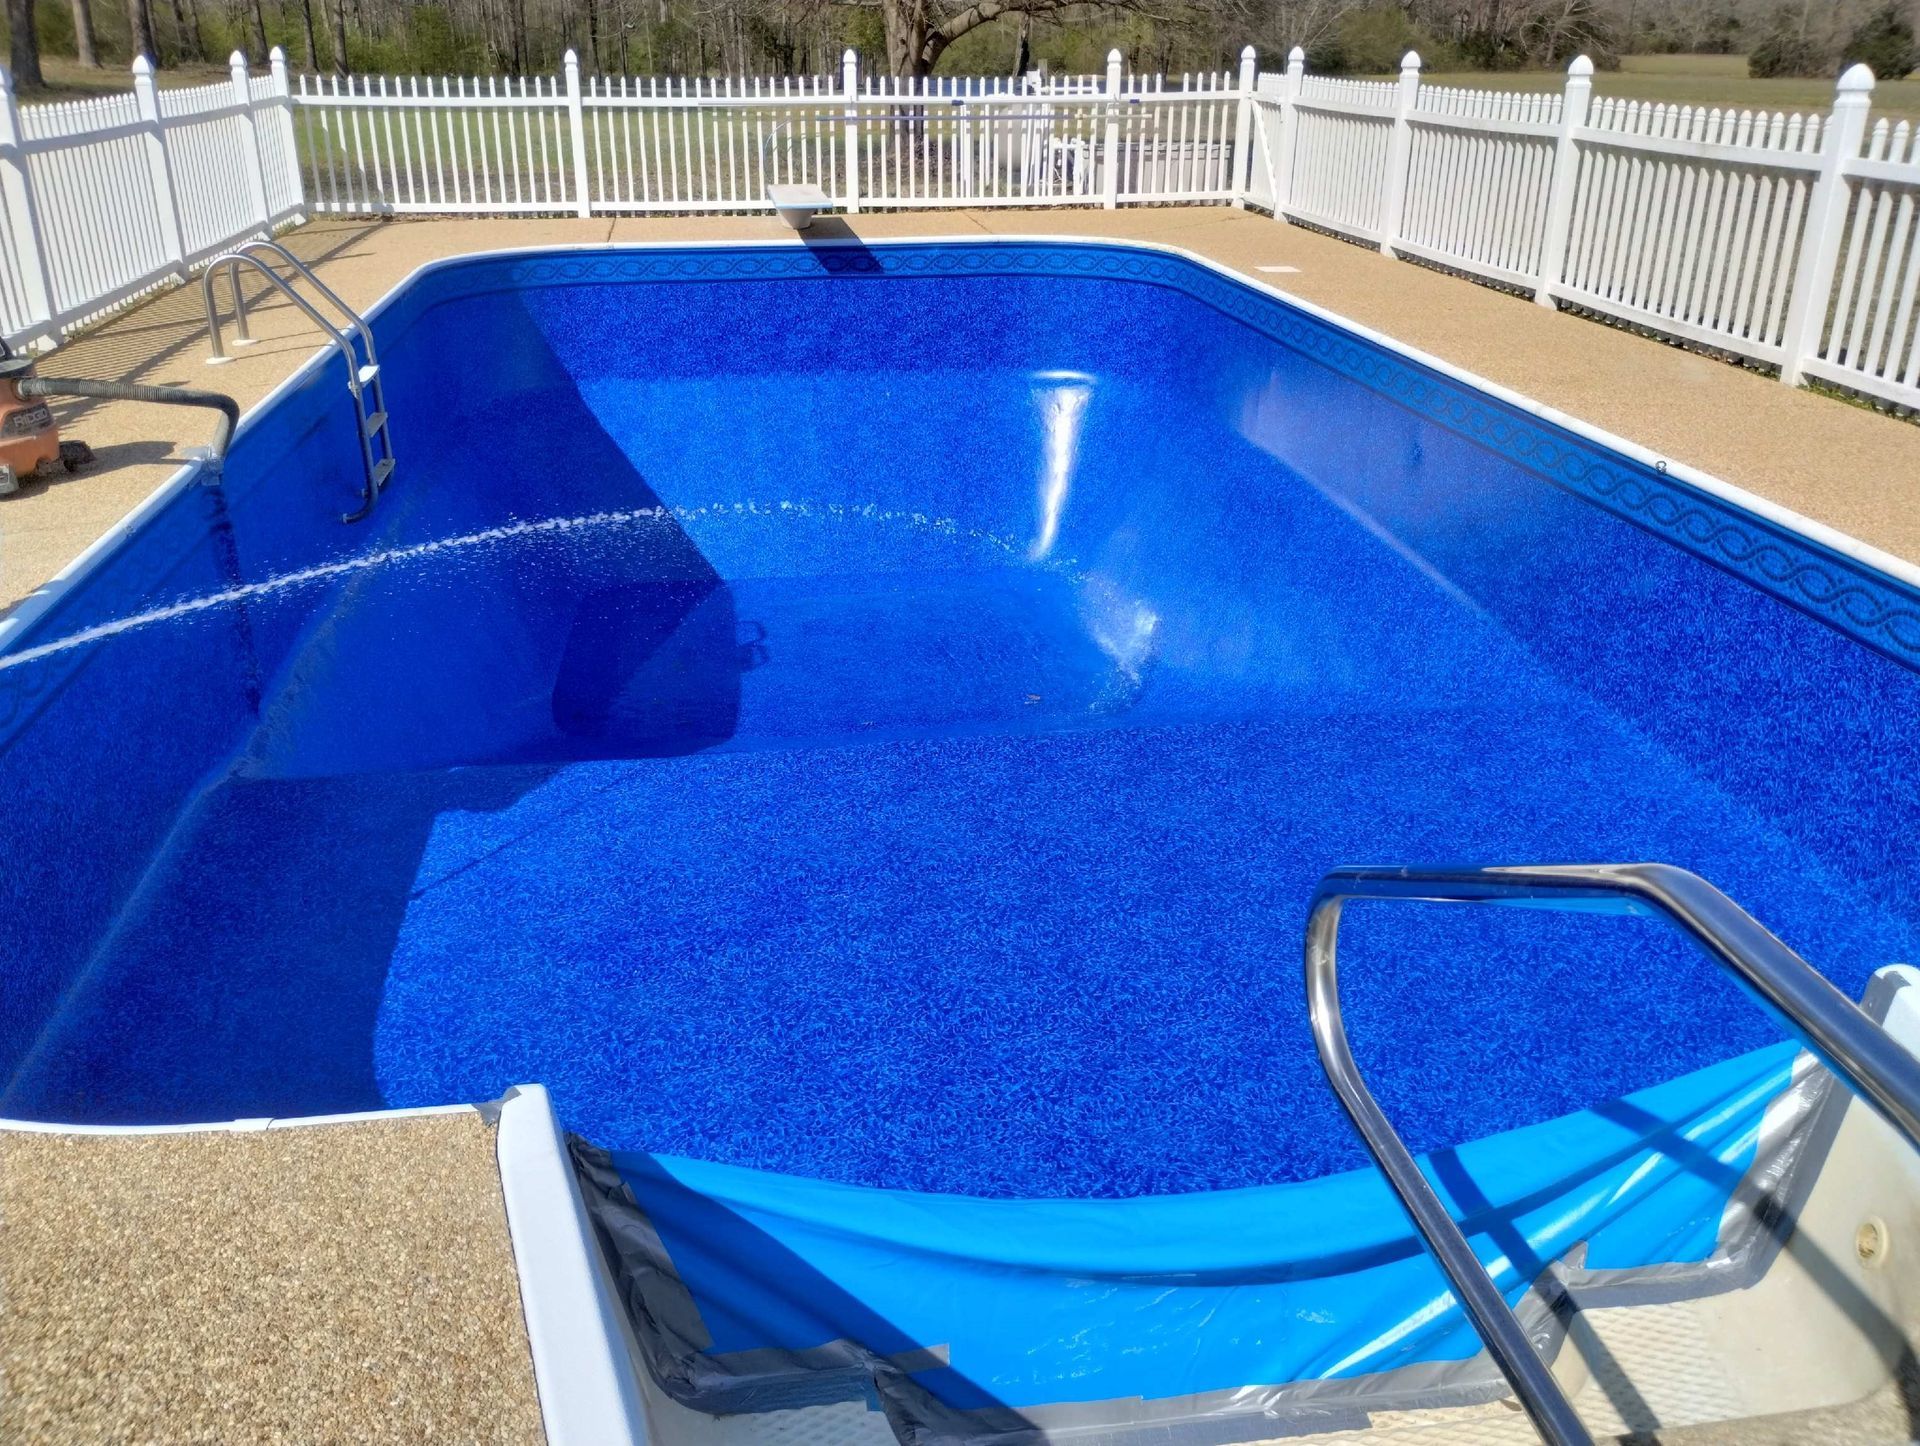 A large blue swimming pool with a white fence around it.